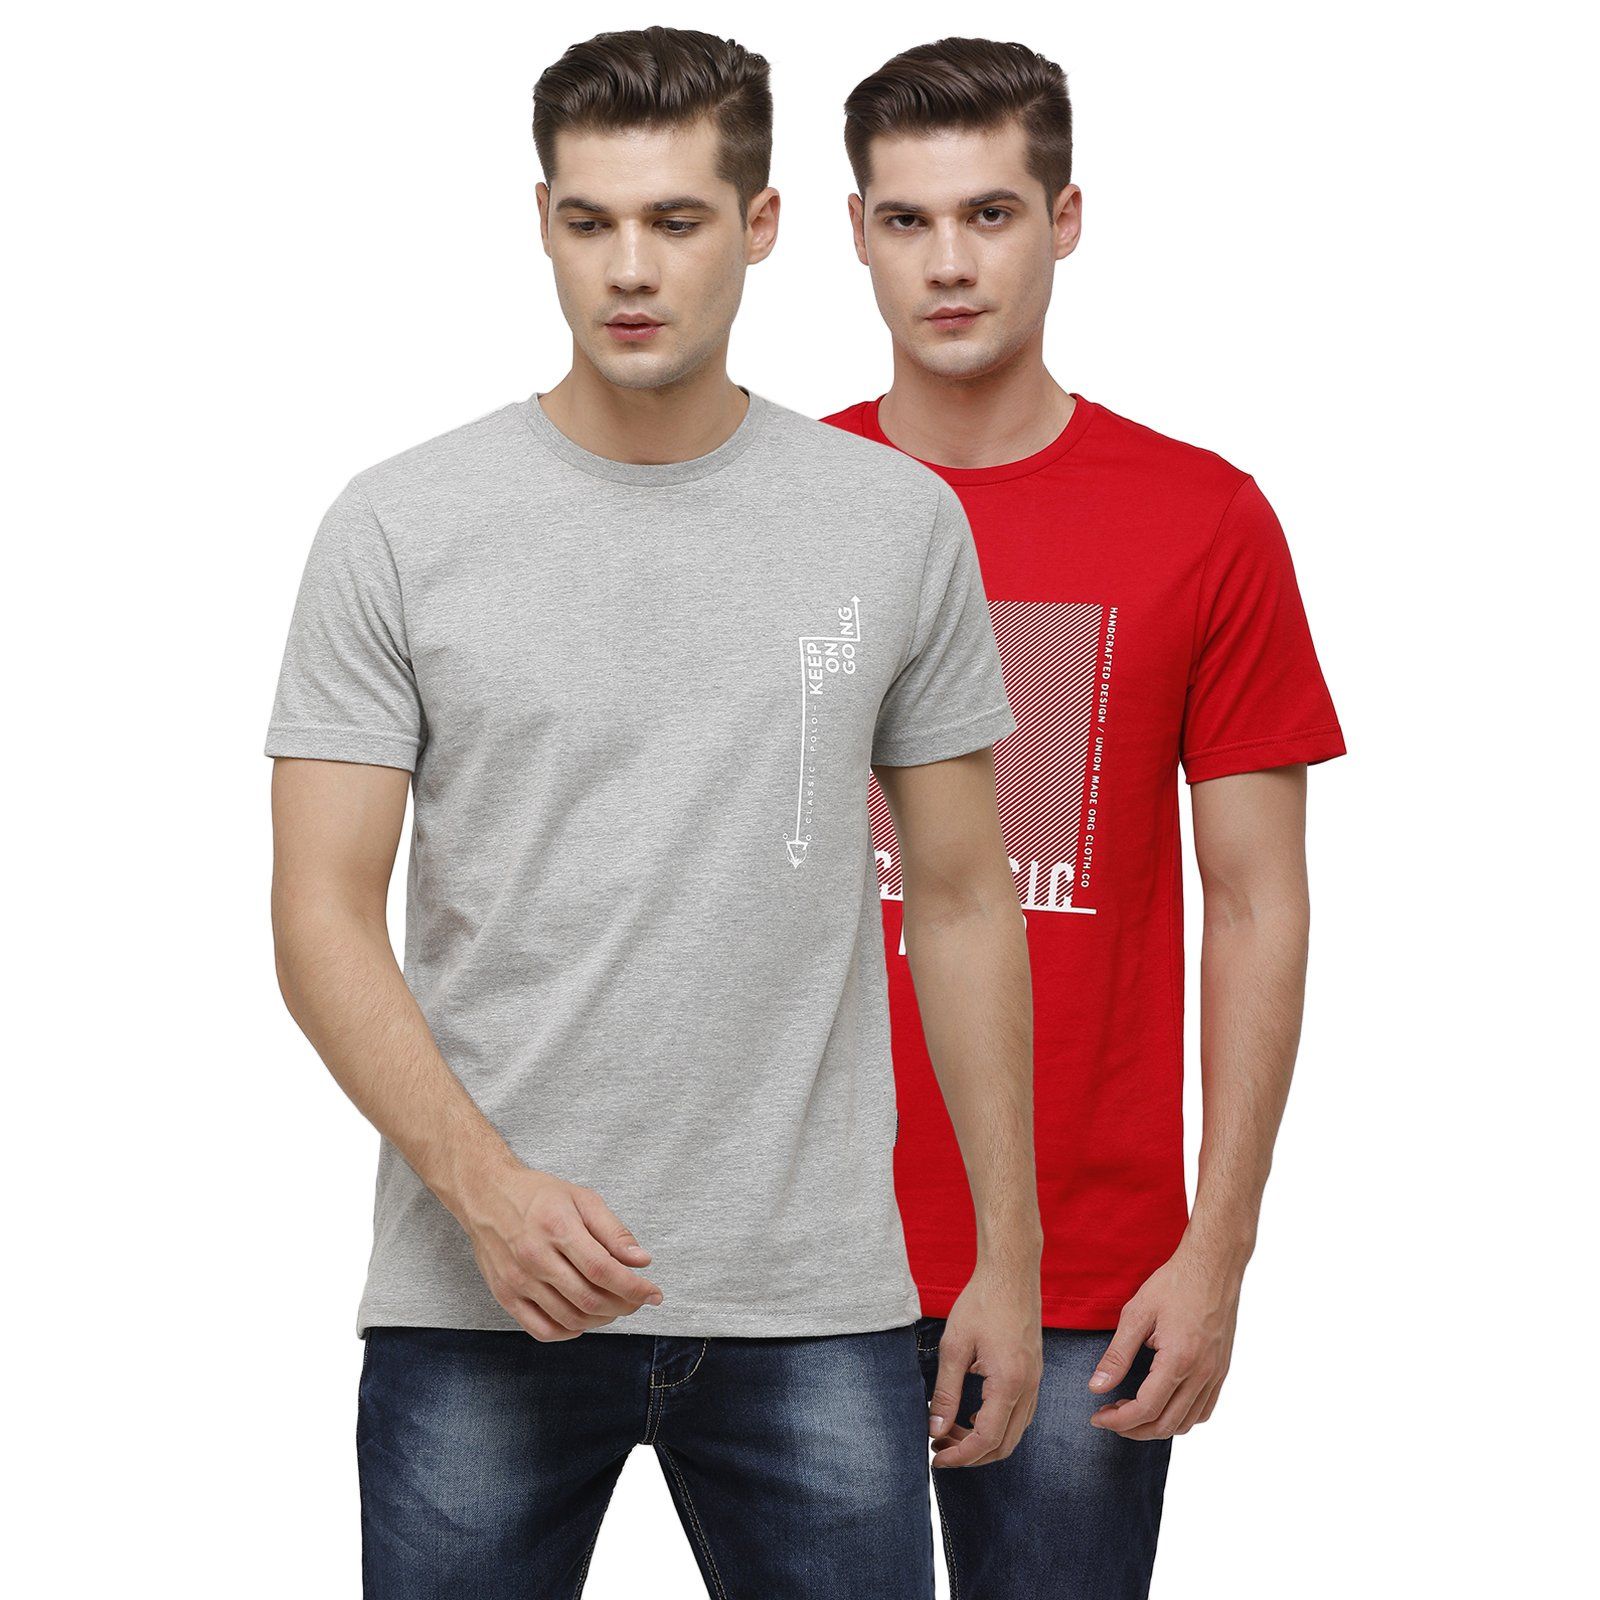 Classic Polo Men's Half Sleeve Crew Neck Red & Grey Slim Fit Single Jersey Pack Of 2 T-shirt Iris- 02 T-shirt Classic Polo 